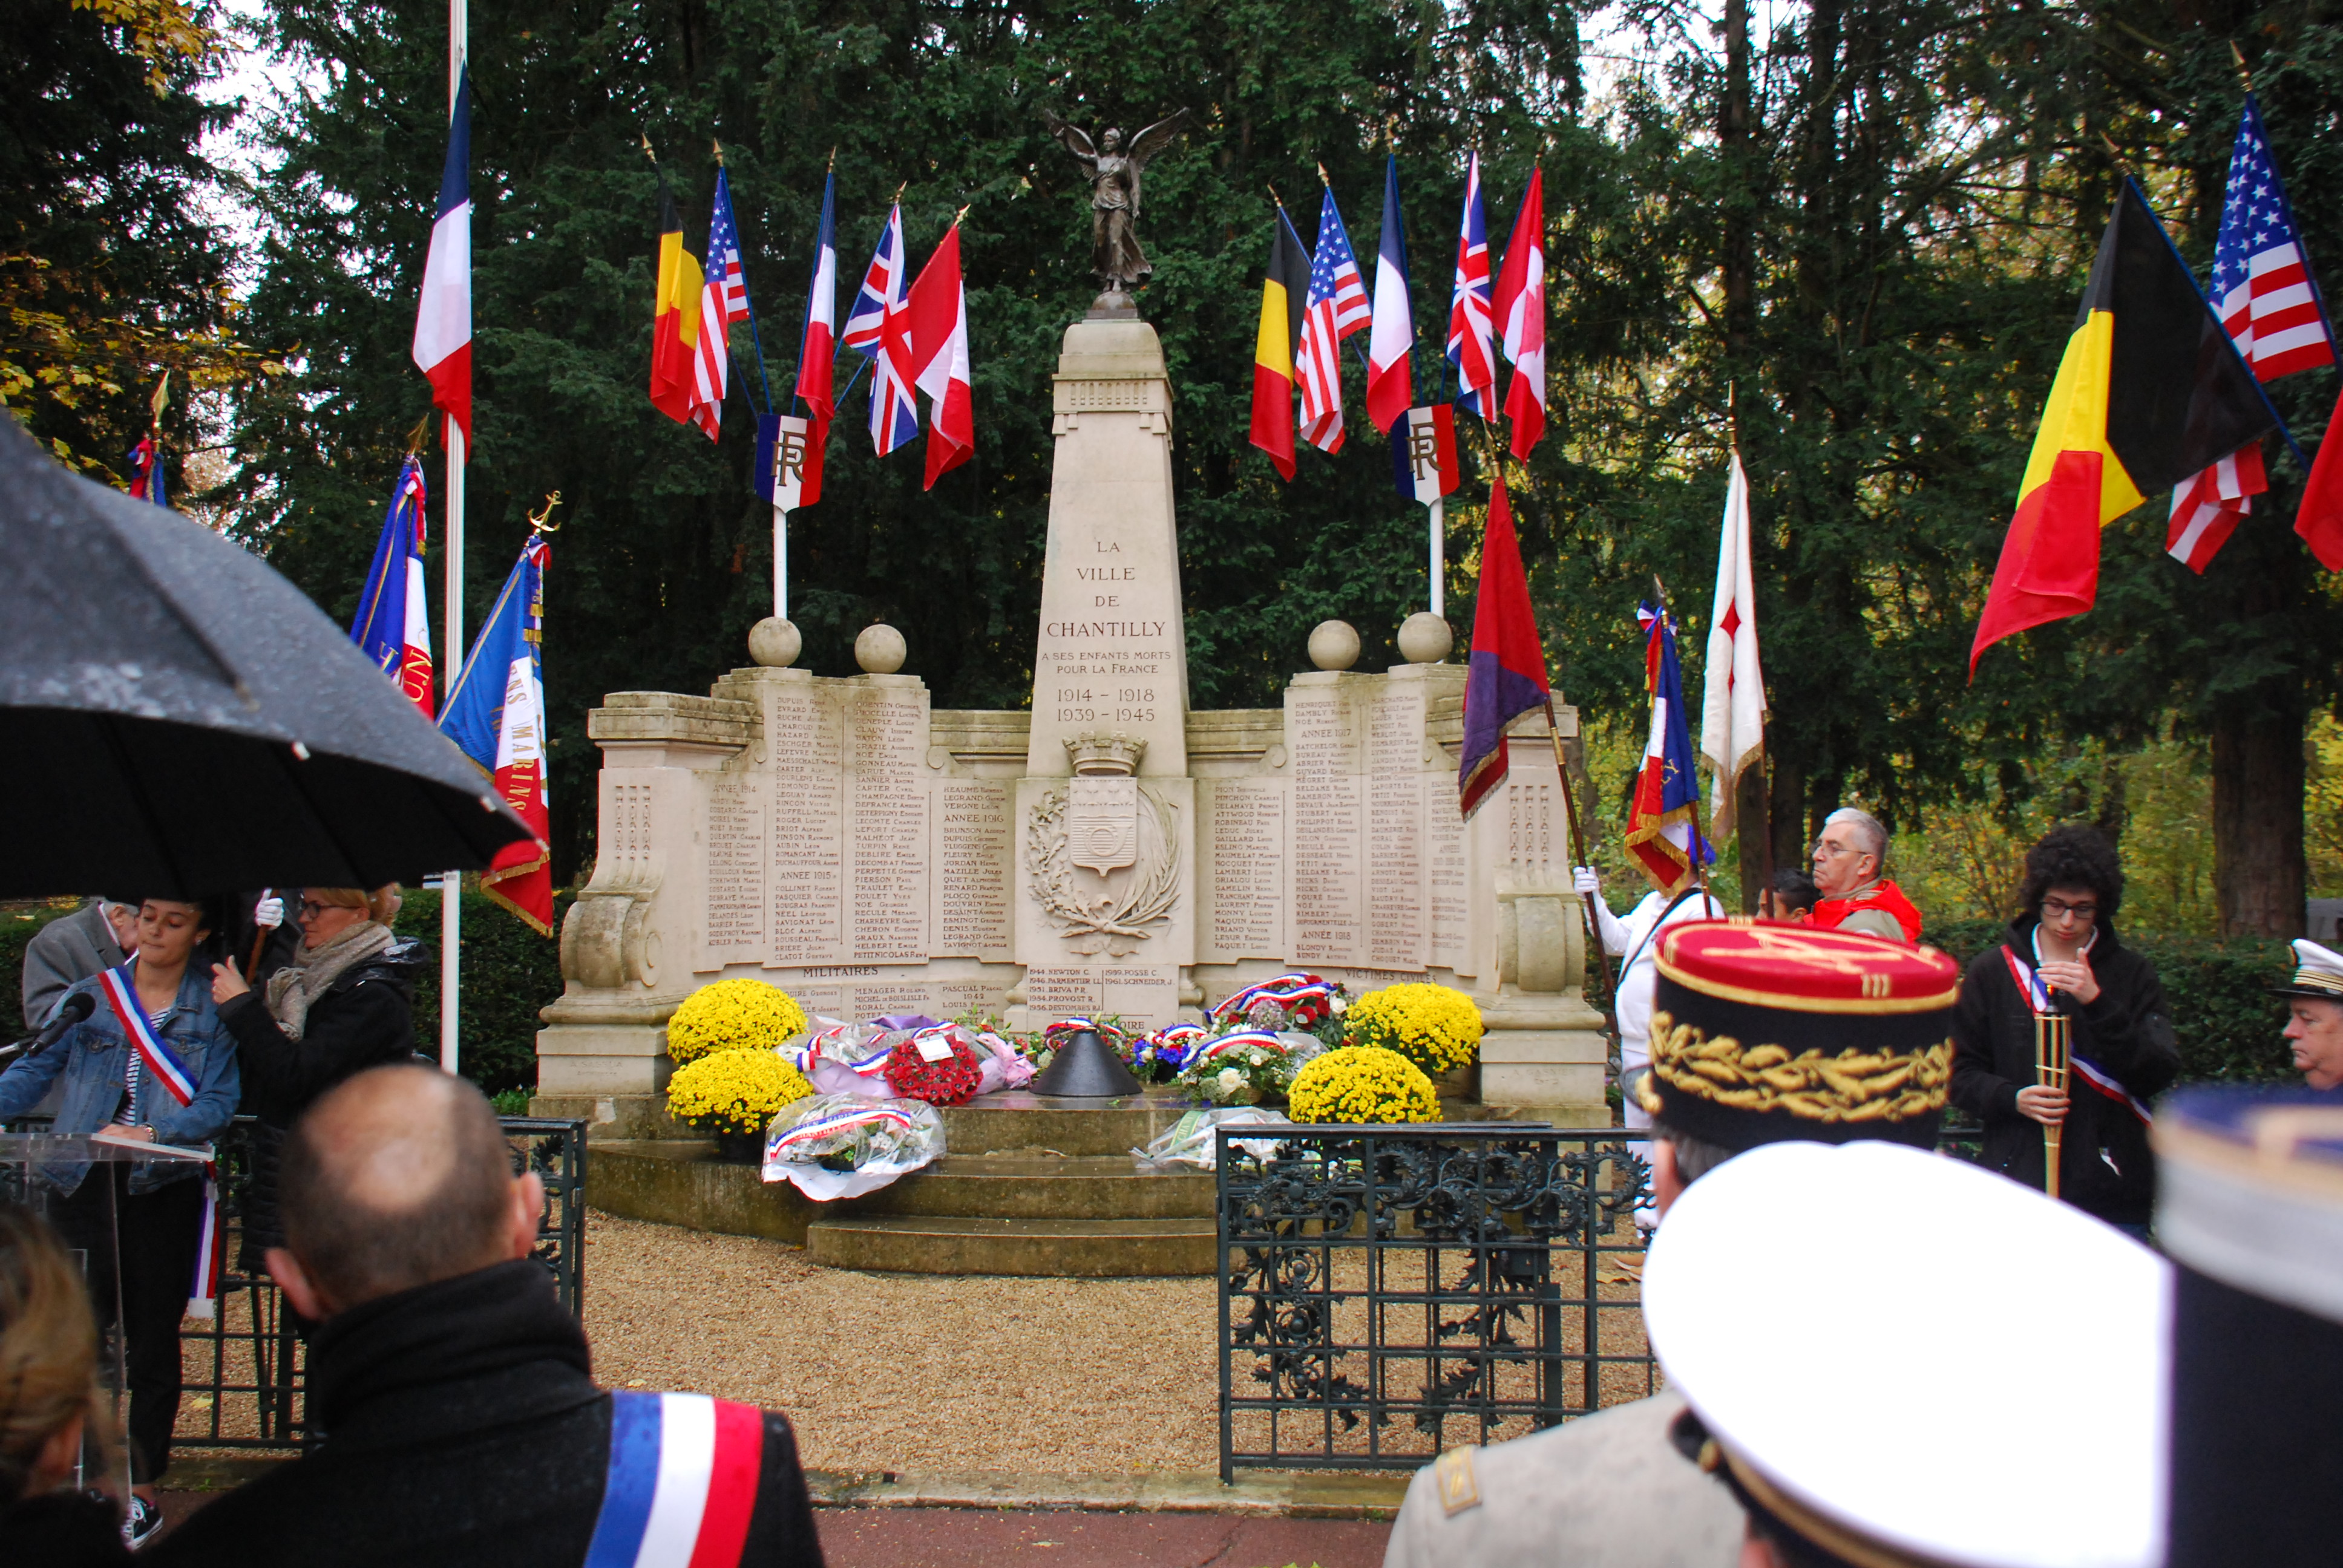 The scene at the Monument to the Dead in Chantilly during Sunday’s ceremony. Photo: John Gilmore